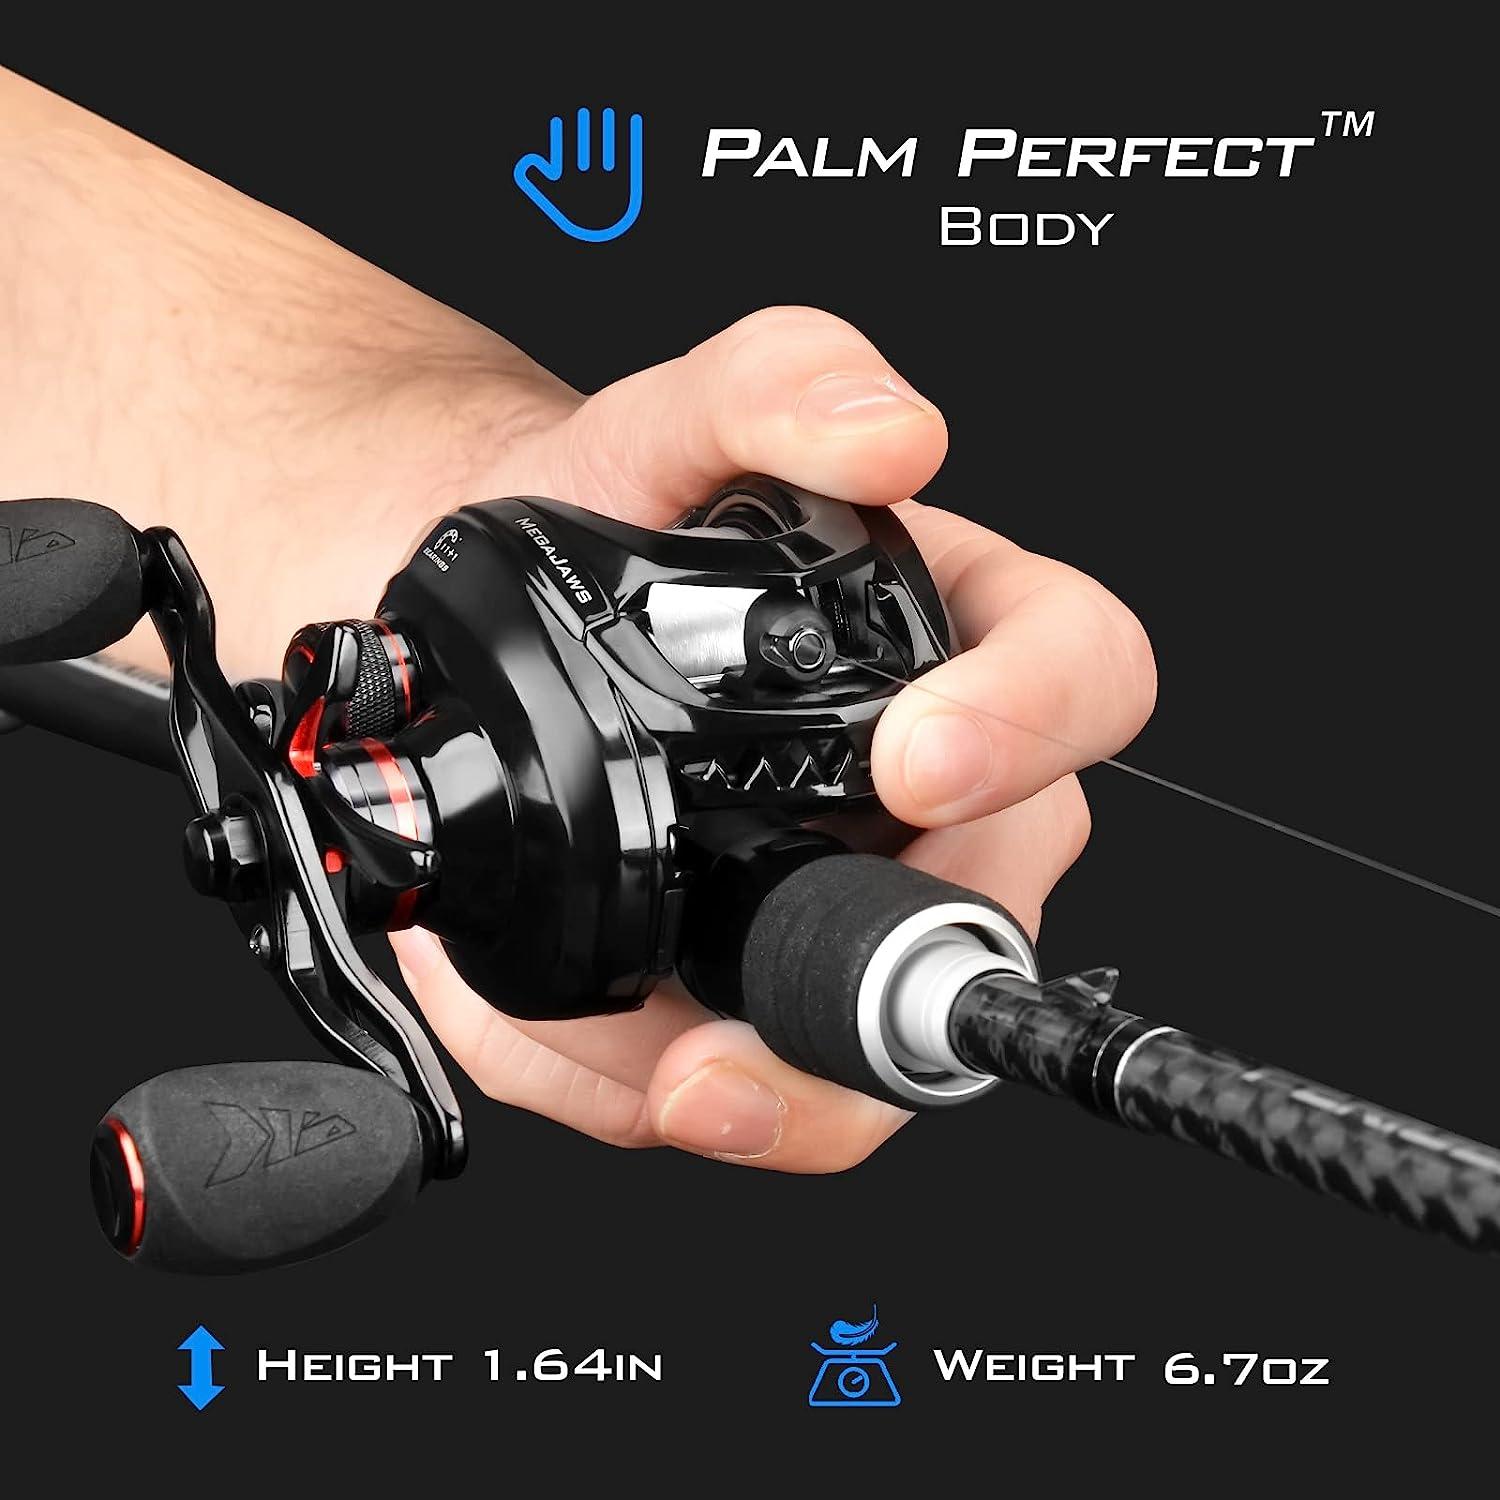 KastKing MegaJaws Baitcasting Fishing Reel, New AutoMag Dual Braking System  Baitcaster Fishing Reel, Only 6.7oz, 17.64 LBs Carbon Fiber Drag, 11+1  Shielded BB, High Speed 5.4:1 to 9.1:1 Gear Ratios A:Right  Handed-Blacktip-7.2:1